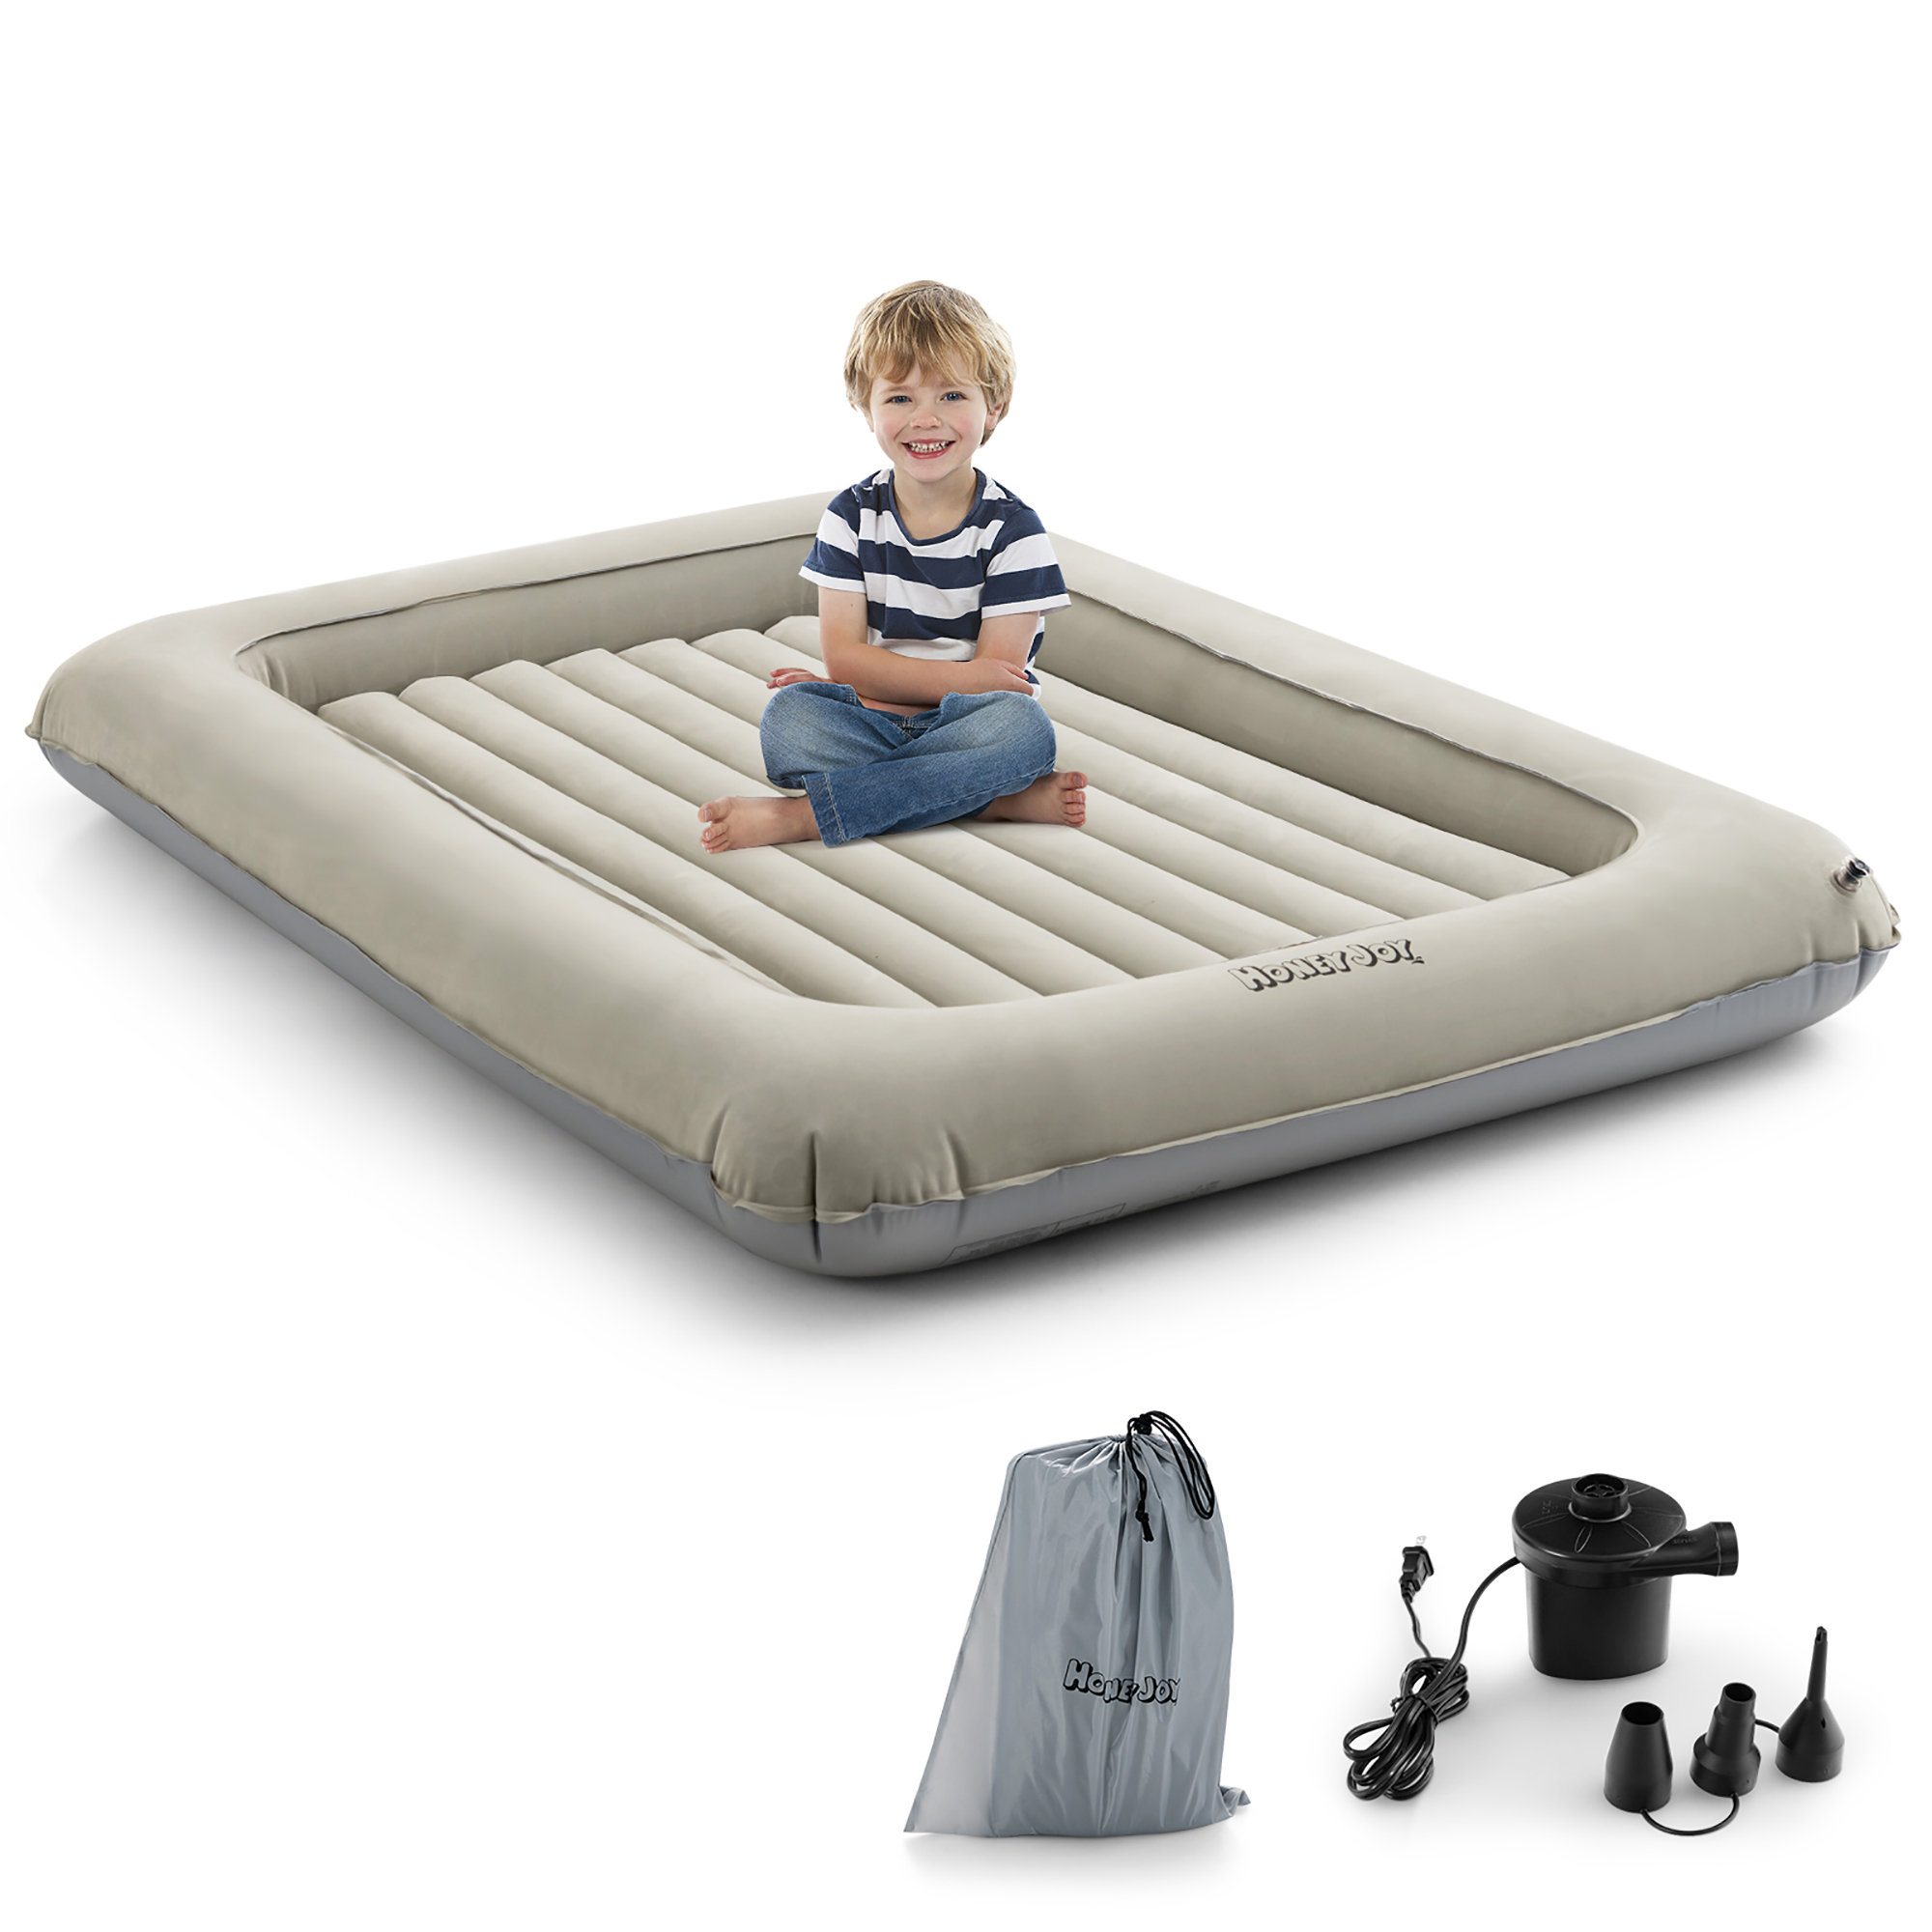 Flocking Inflatable PVC Air Beds Mattresses for Home Indoor and